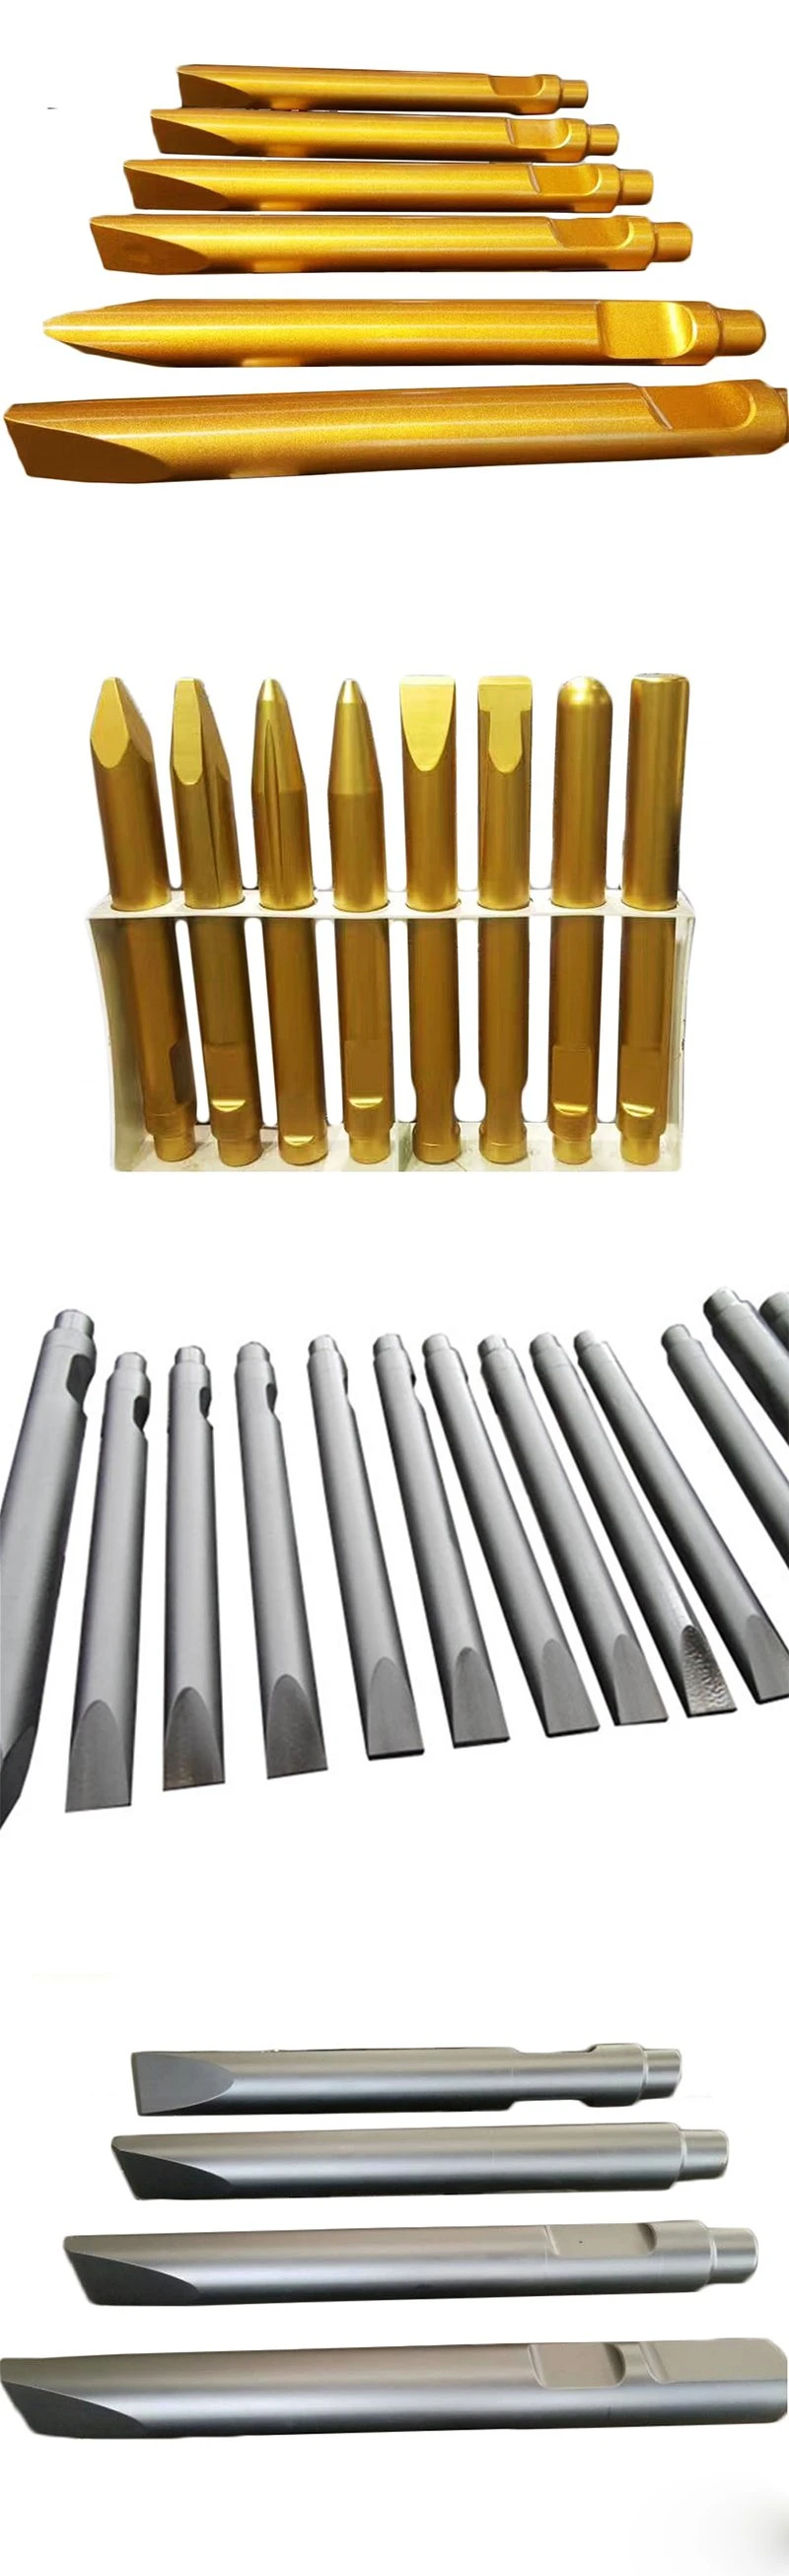 Edt3200 Edt3500 Blunt Wedge Type Excavator Hydraulic Breaker Spare Parts Rock Chisel for Edt Breaker Hammer Tools for Railway